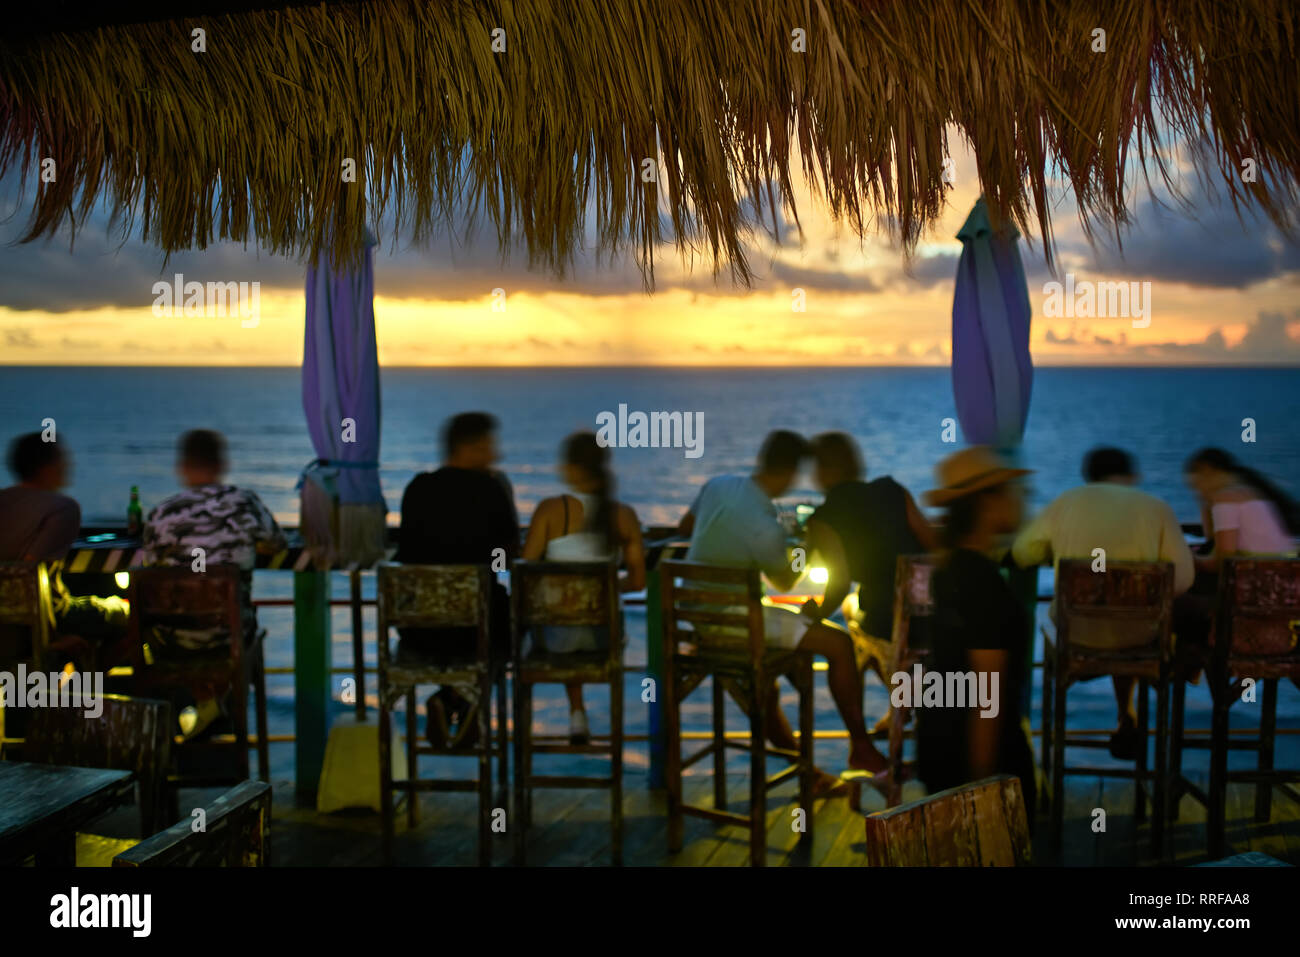 People are relaxing by the wooden rack on the terrace of the outdoor cafe  on the breathtaking background of the sunset sky and the sea on Bali.  Horizo Stock Photo - Alamy